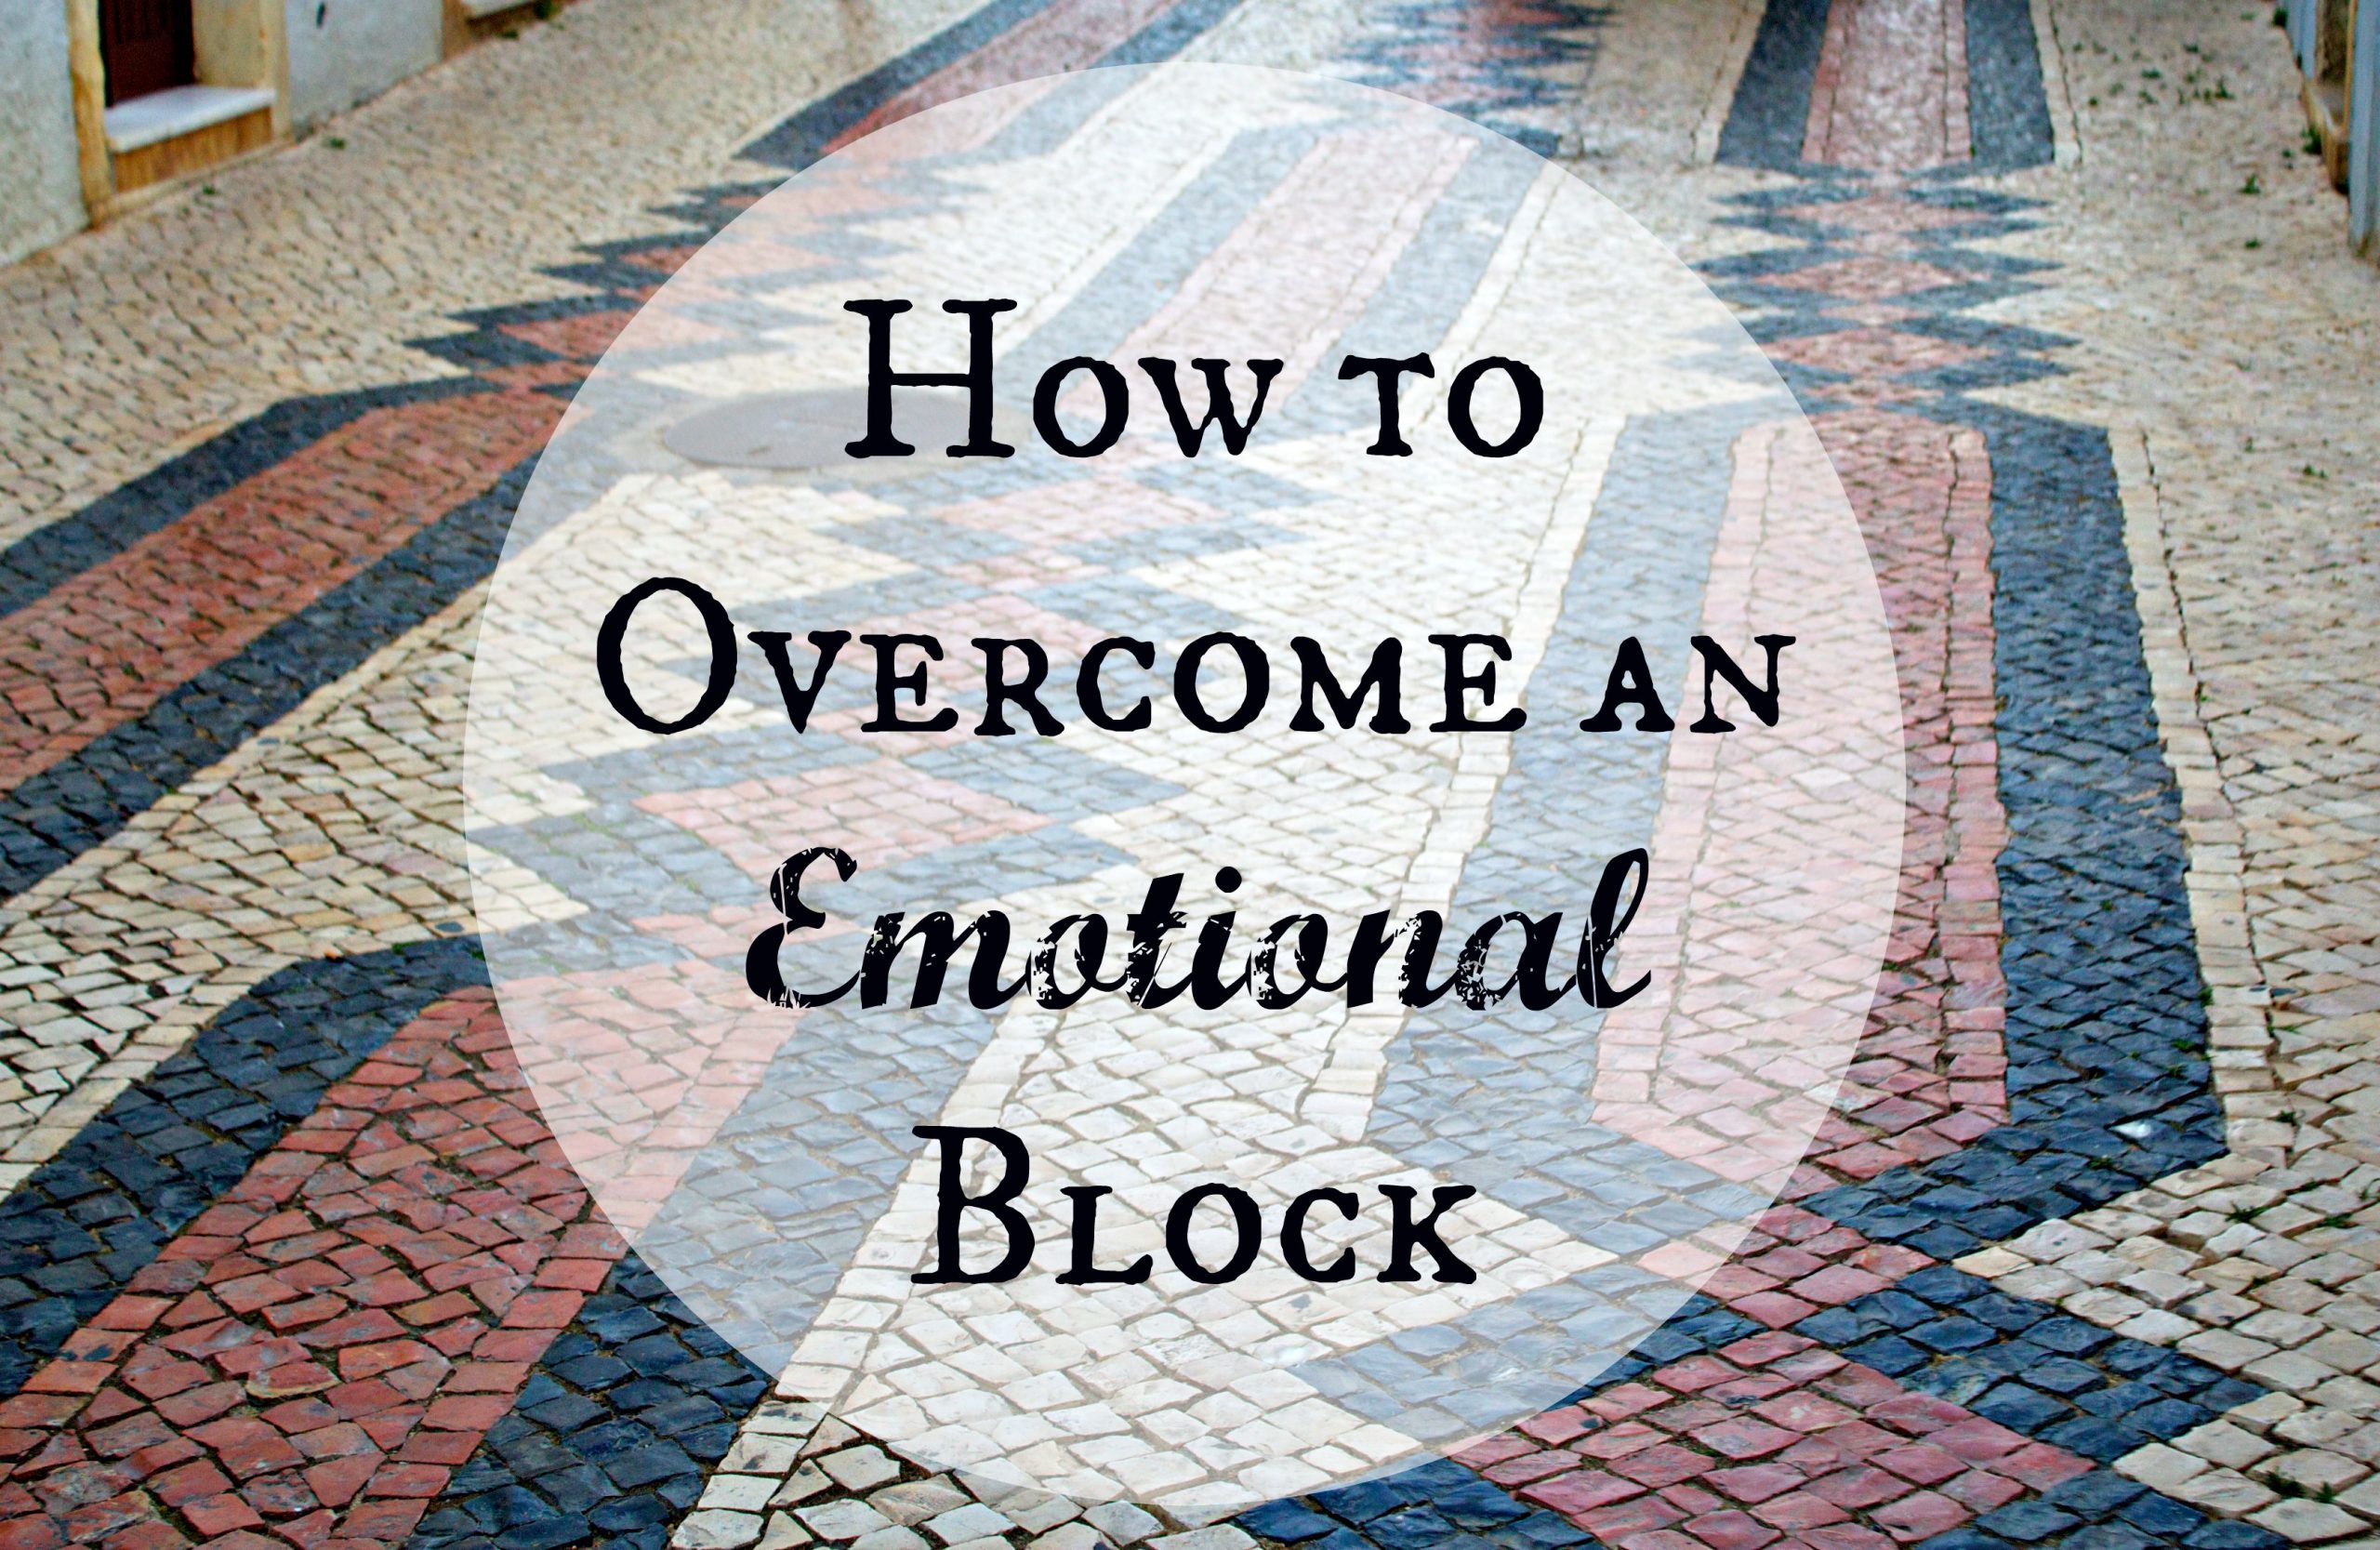 How to Overcome an Emotional Block